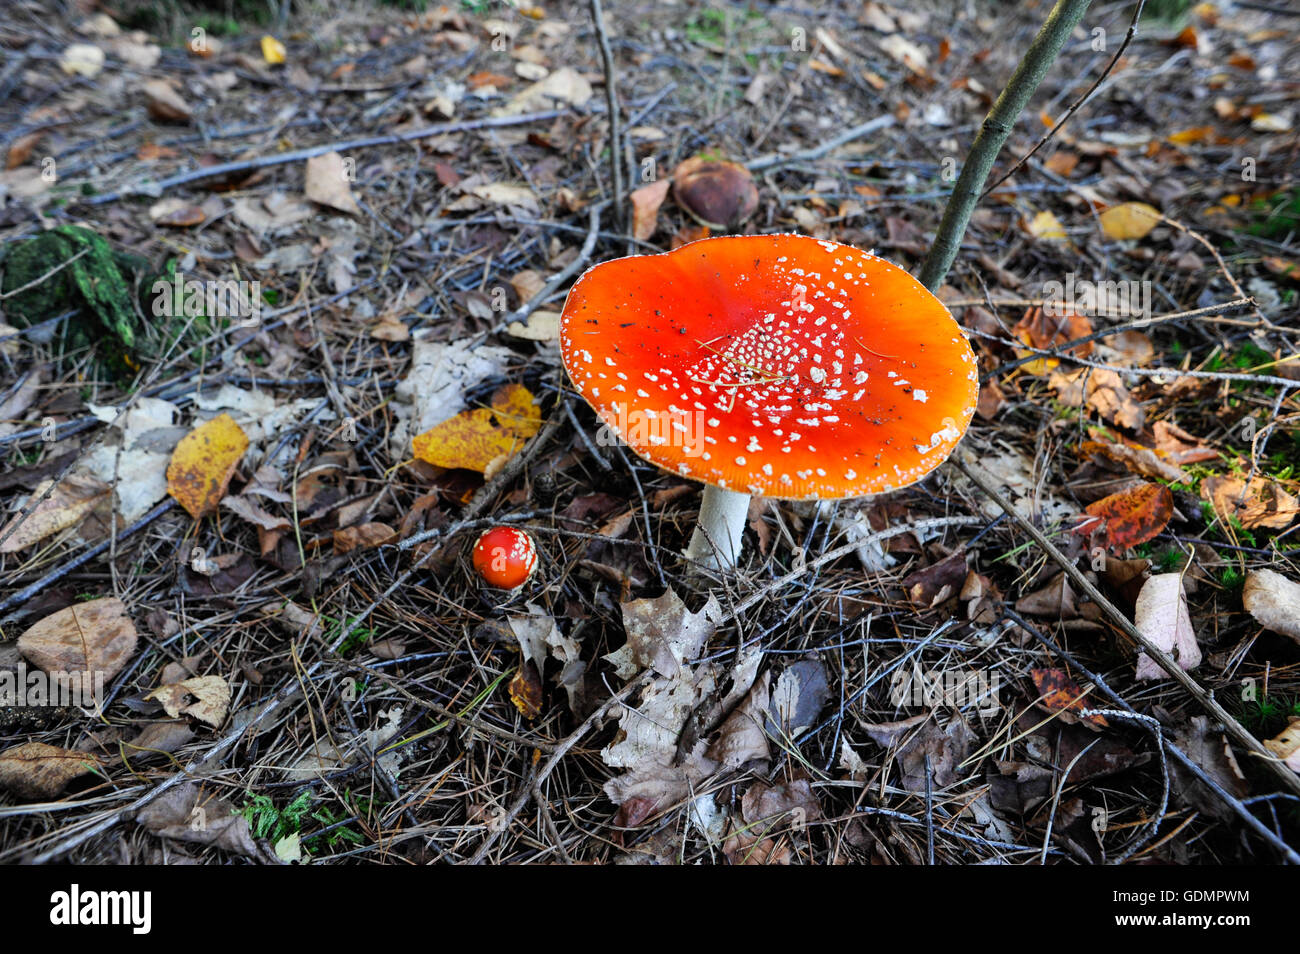 Poisonous white spotted mushroom closeup photo take in Autumn, from a forest in Netherlands Stock Photo